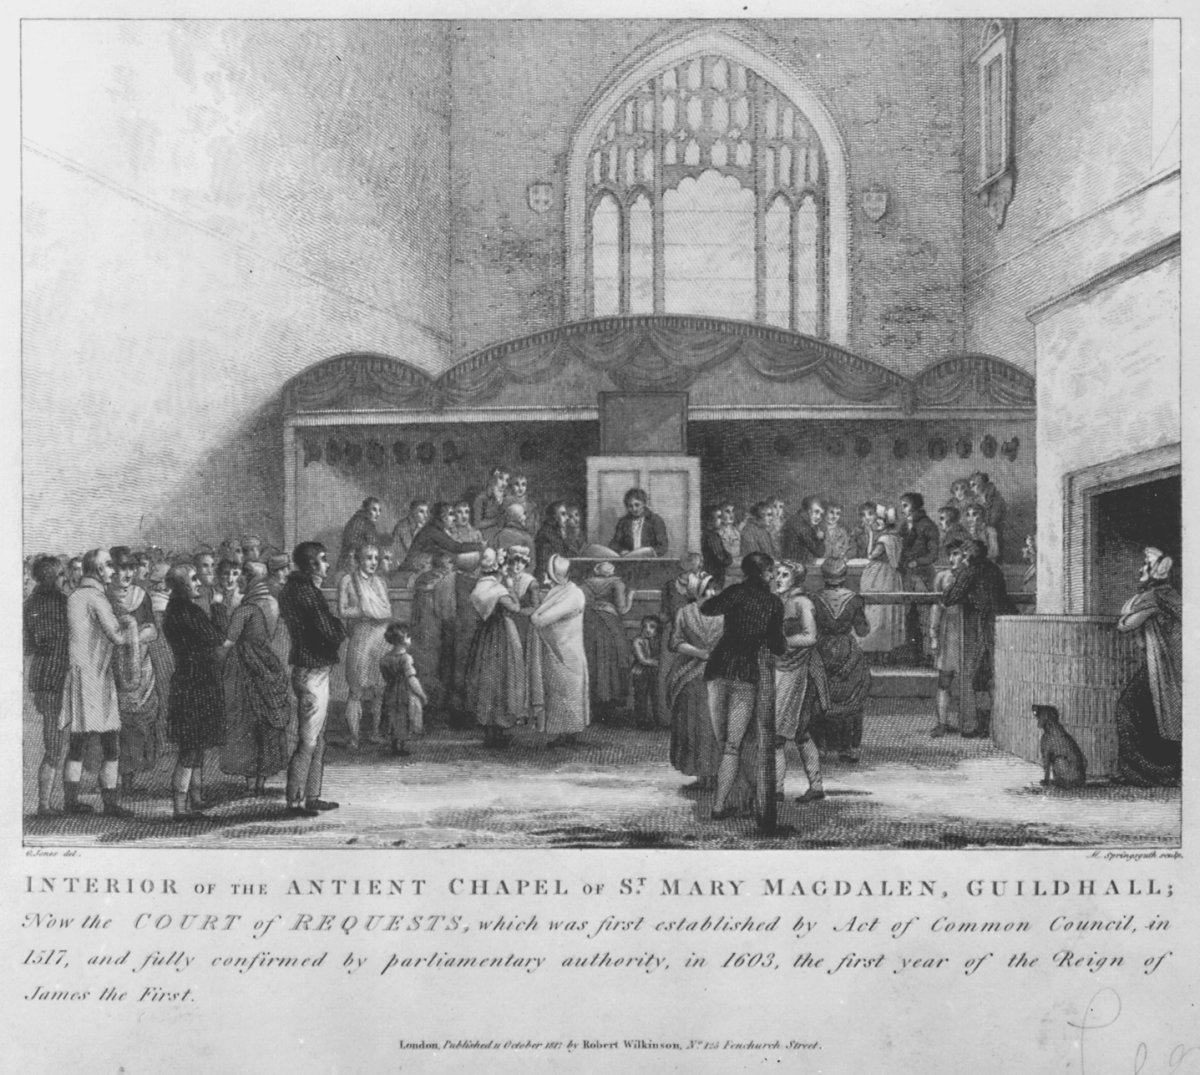 Image of Interior of the Antient Chapel of St. Mary Magdalen, Guildhall